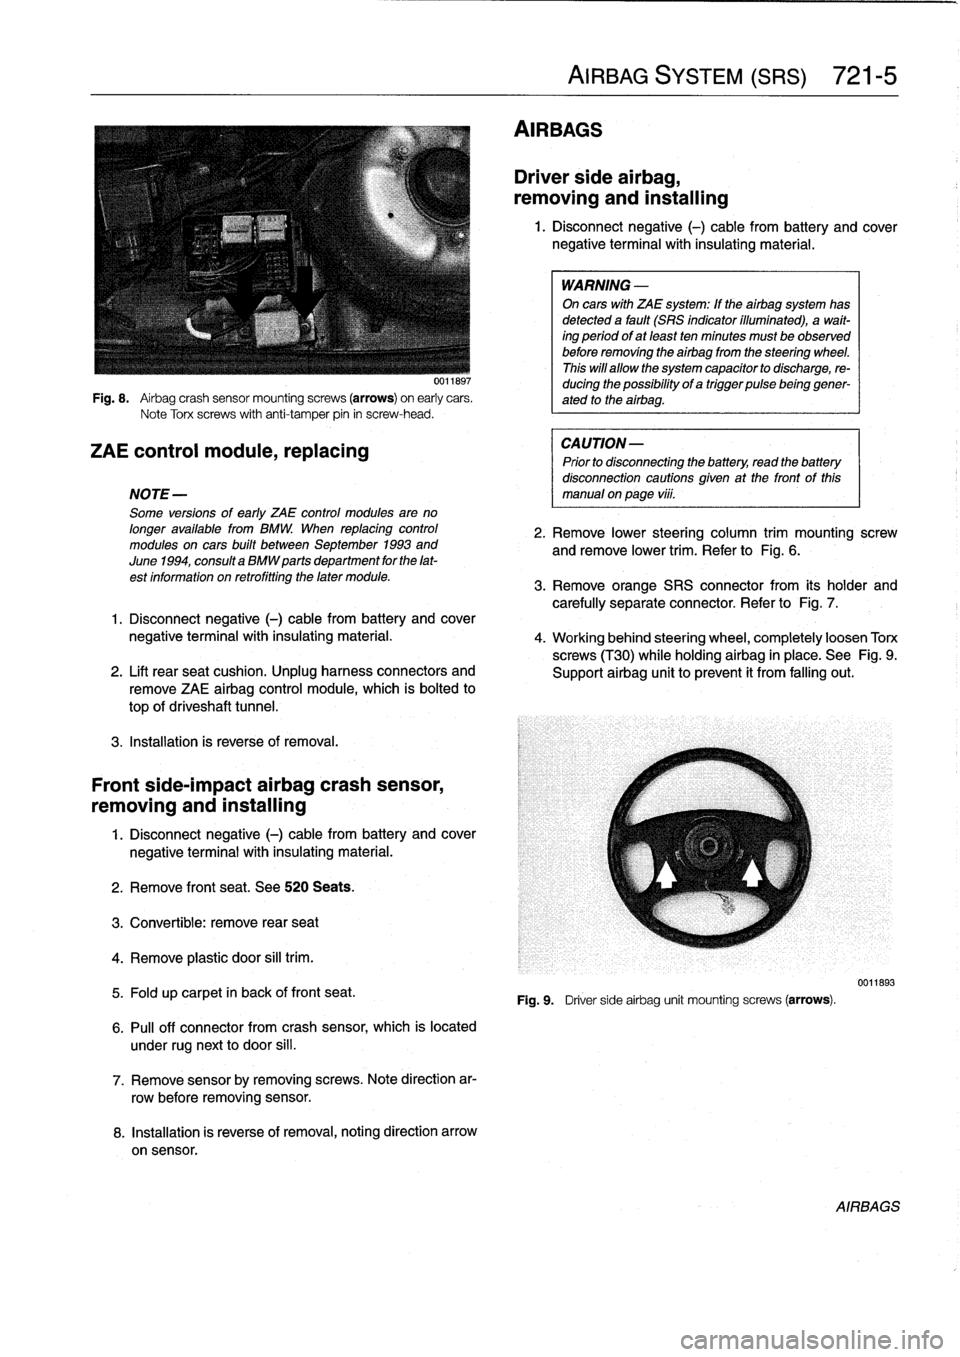 BMW M3 1998 E36 Workshop Manual 
Fig
.
8
.

	

Airbag
crash
sensor
mountingscrews
(arrows)
on
early
cars
.
Note
Torx
screws
with
anti-tamper
pin
in
screw-head
.

ZAE
control
module,
replacing

NOTE-

Some
versions
of
early
ZAE
contr